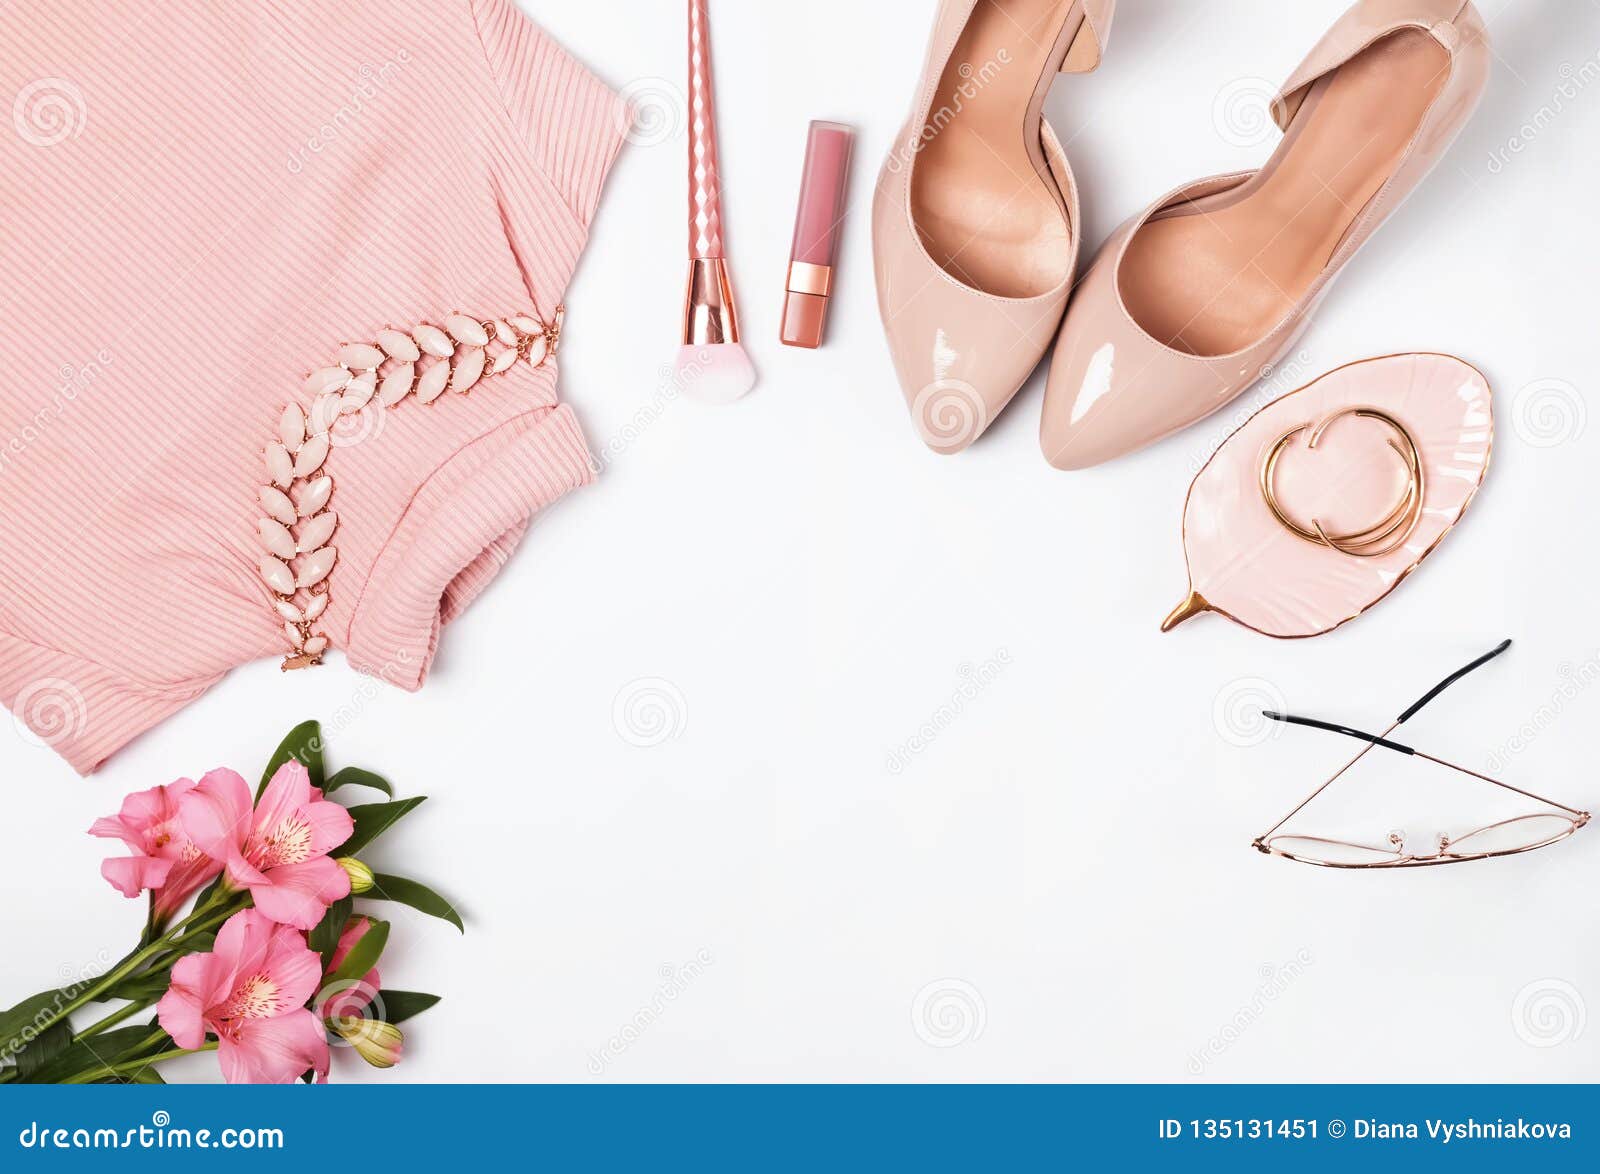 Outfit in Beige and Pale Pink Colors. Stock Image - Image of clothes ...